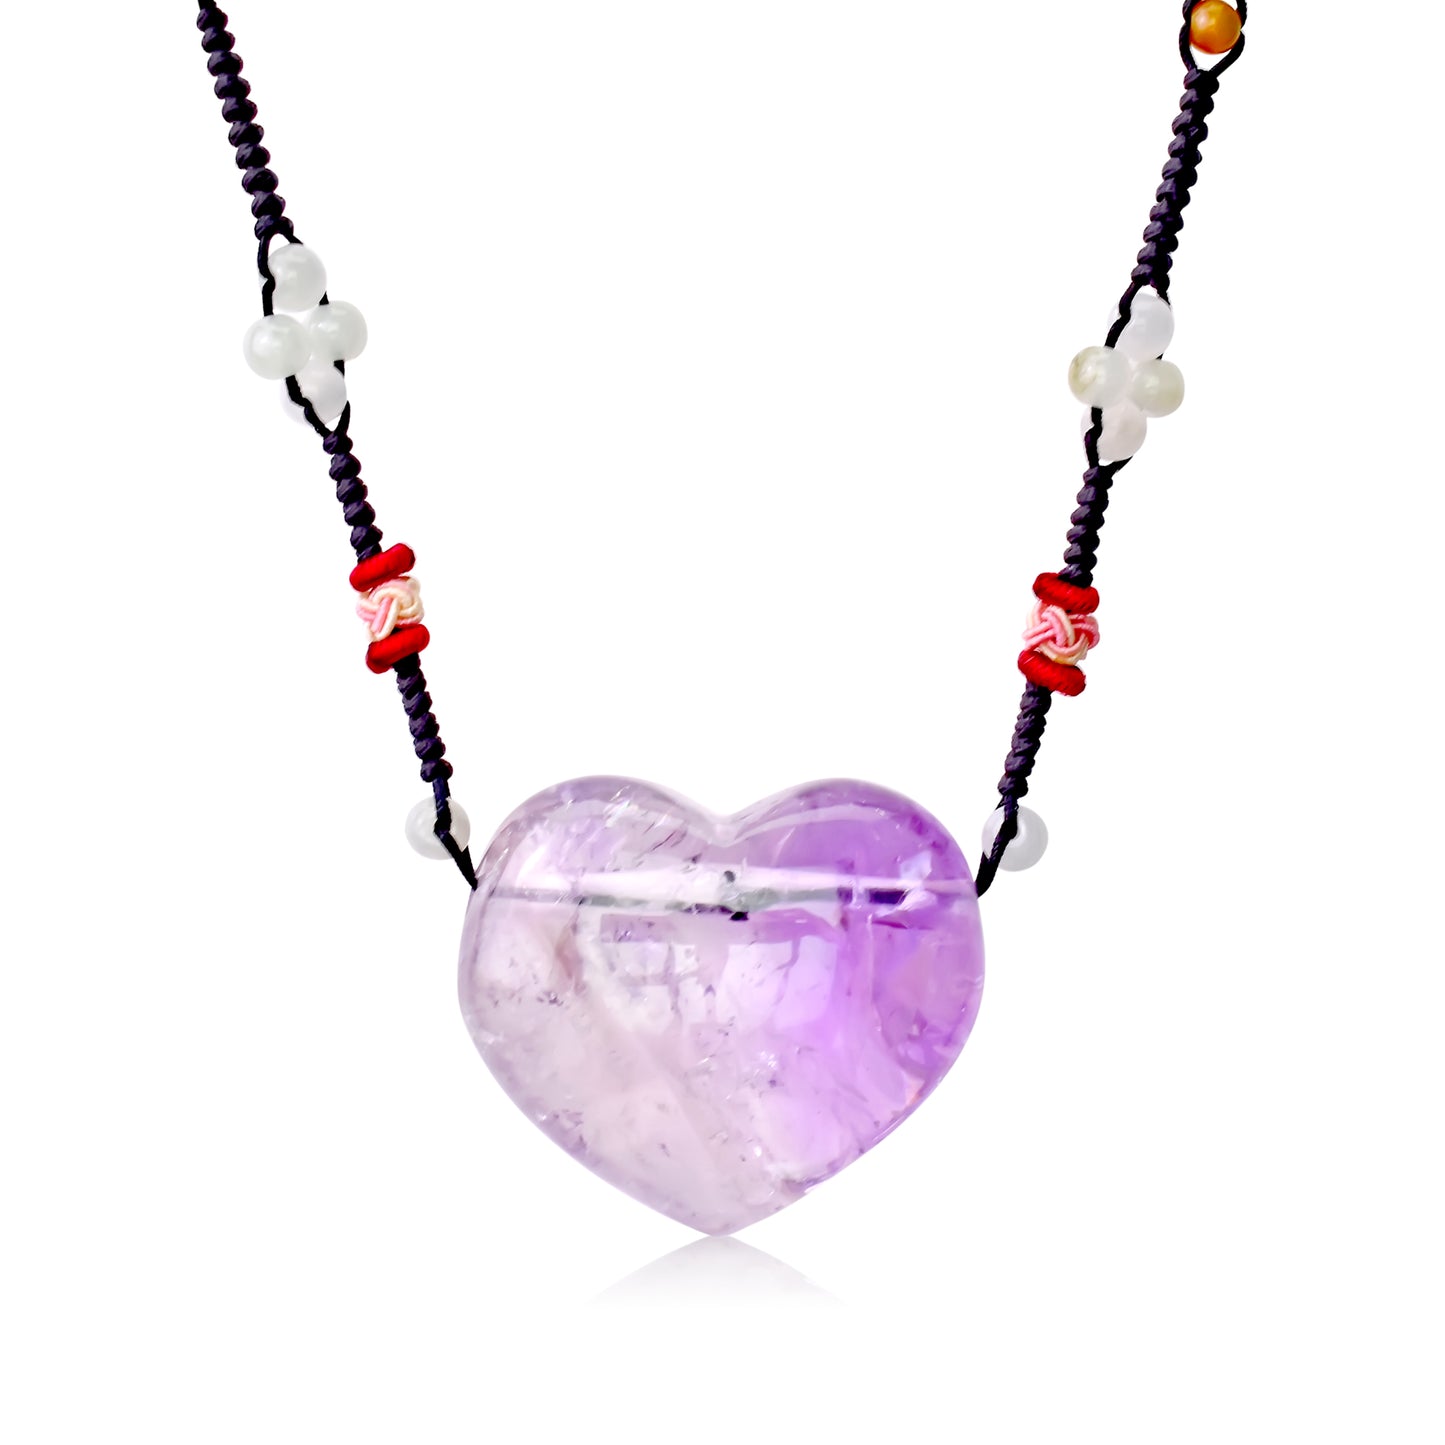 Add Romance to Your Look with a Colossal Amethyst Heart Necklace made with Black Cord